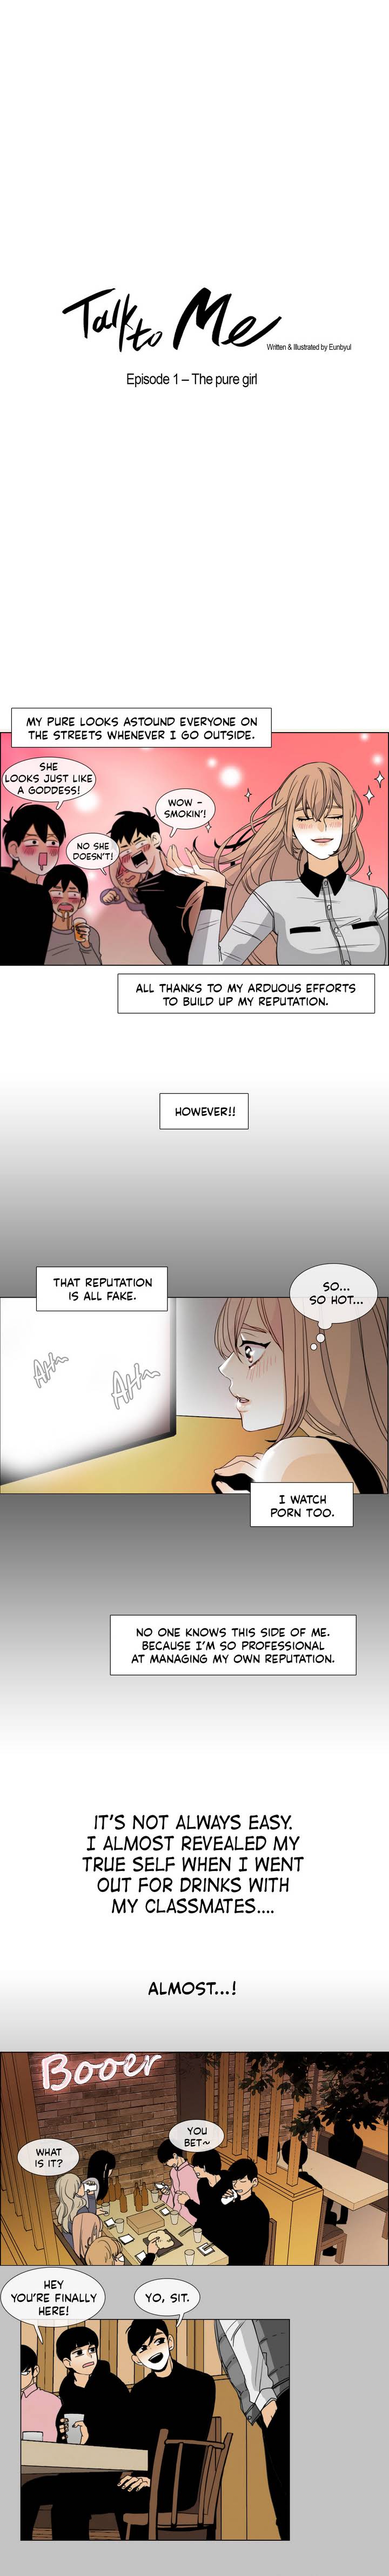 [Silverstar] Talk To Me Ch.1-24 (English) (Ongoing) page 3 full